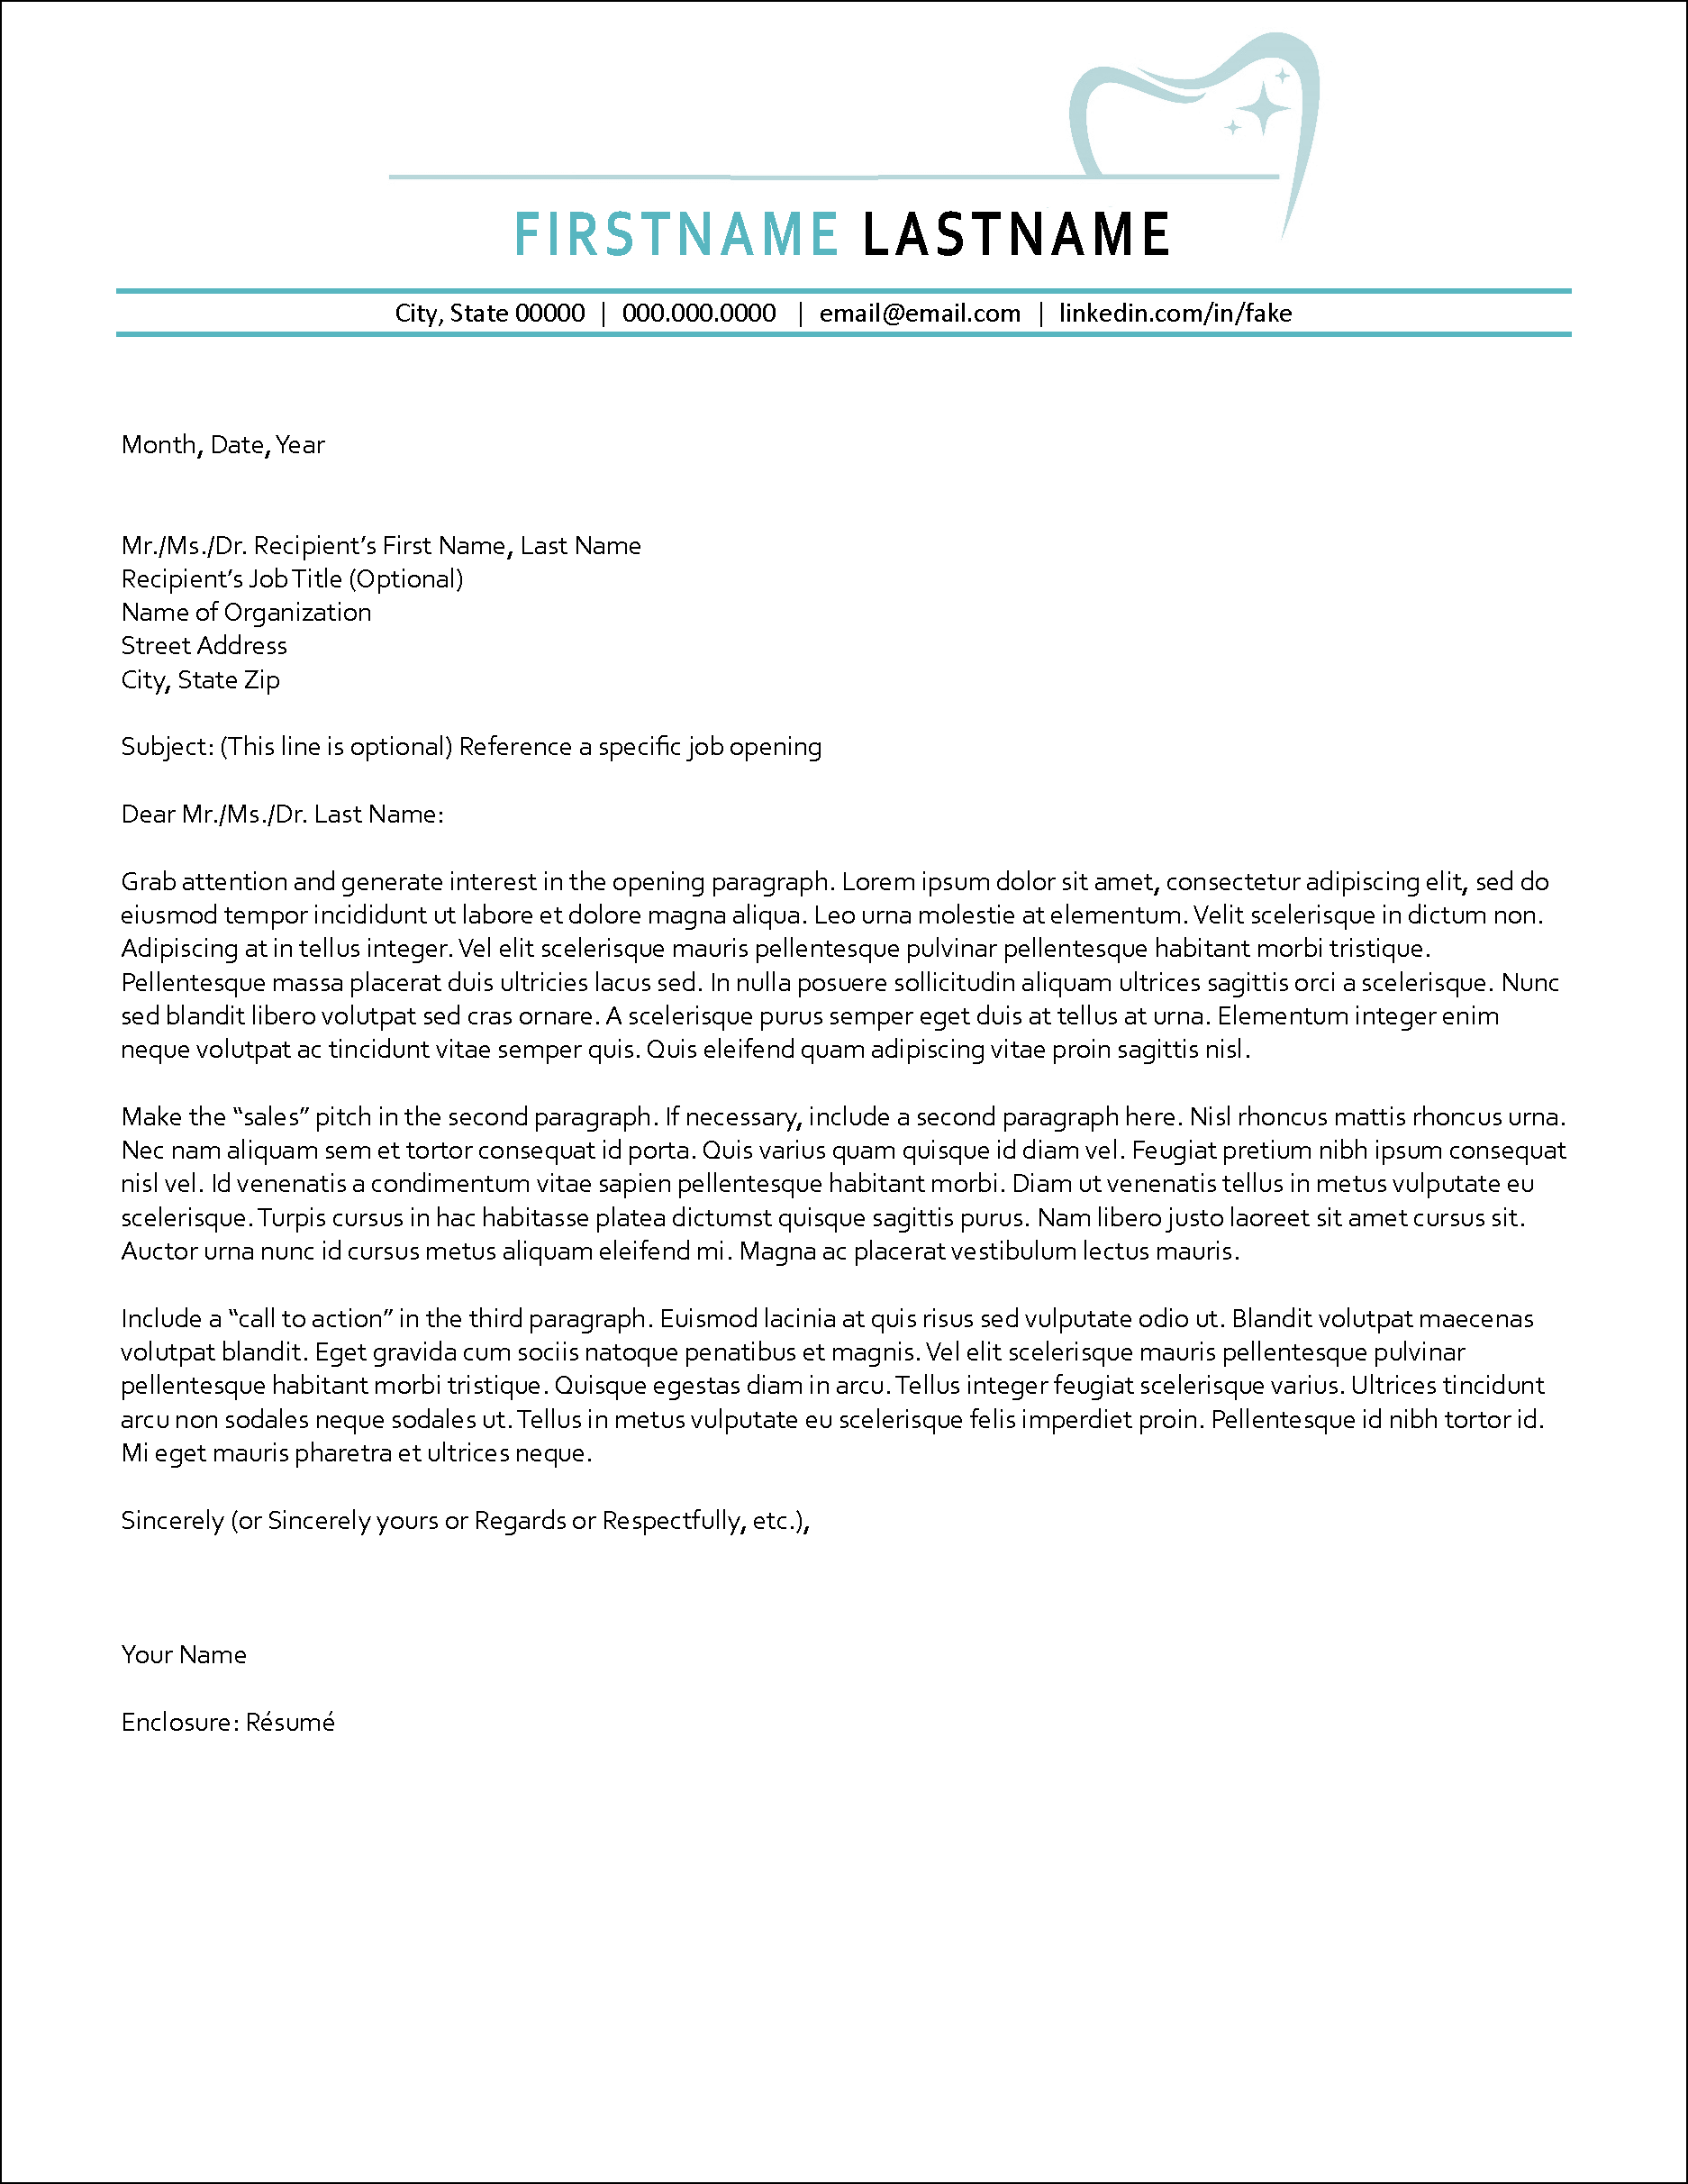 SmileWrite Cover Letter